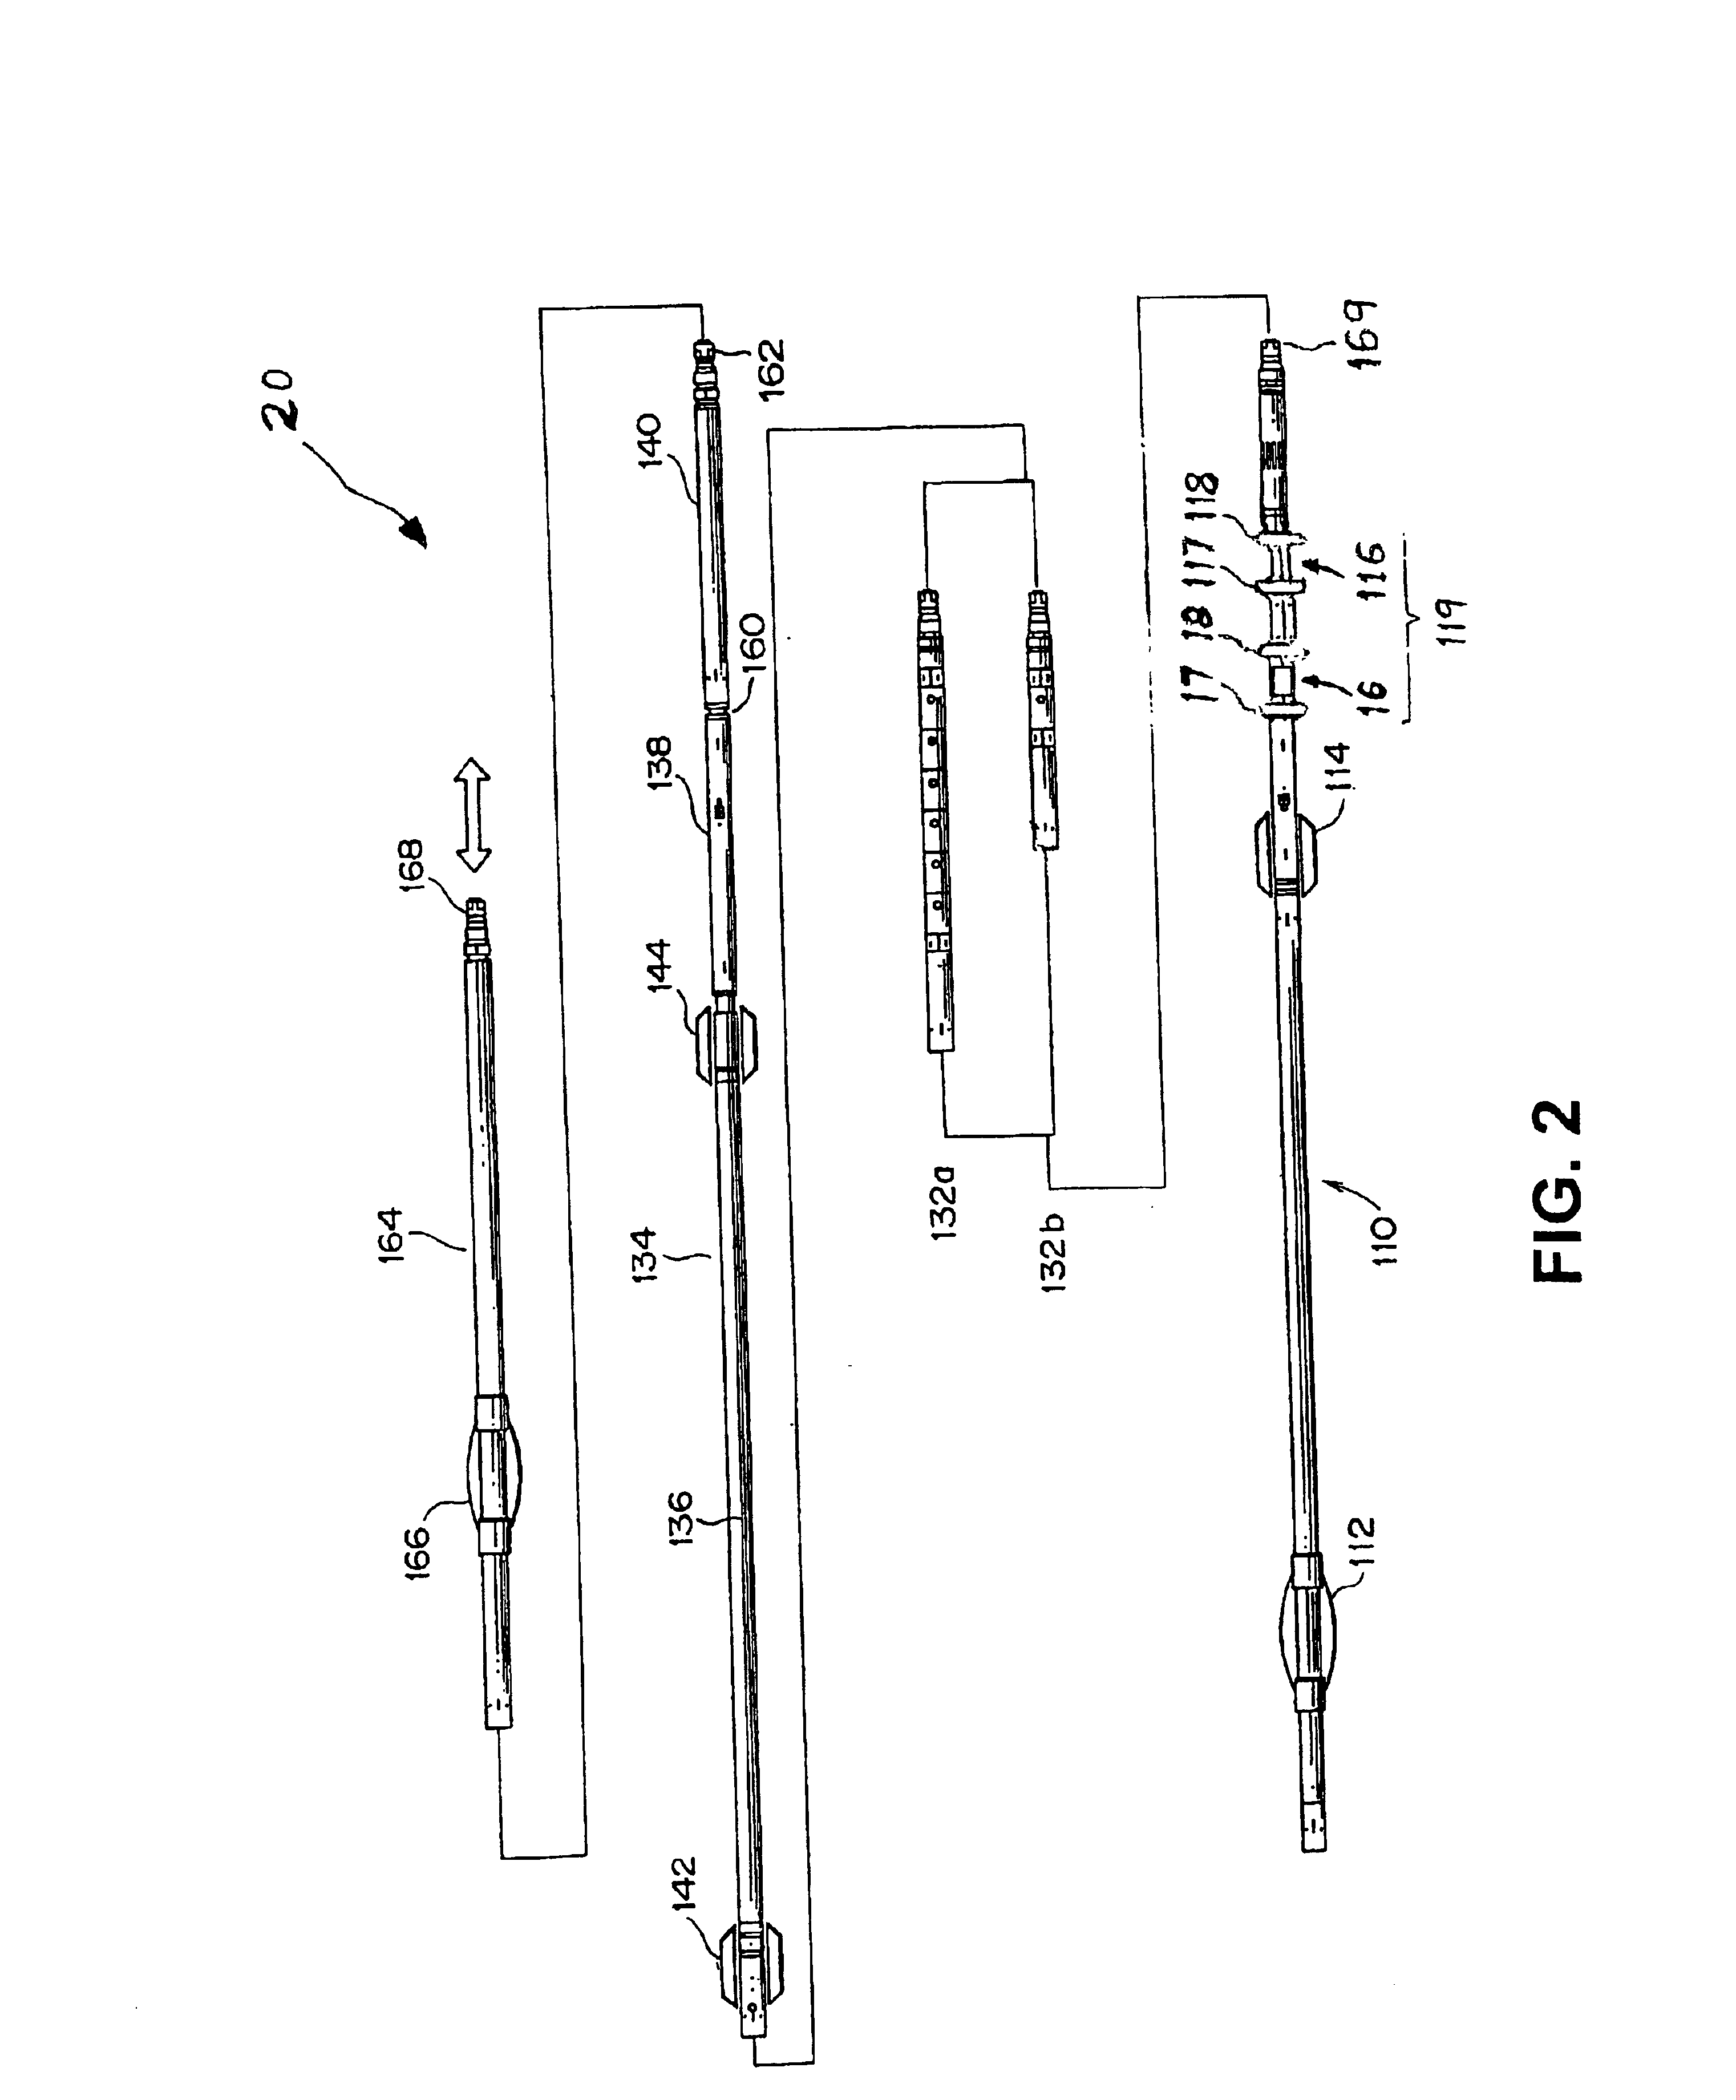 Oil well acoustic logging tool with baffles forming an acoustic waveguide